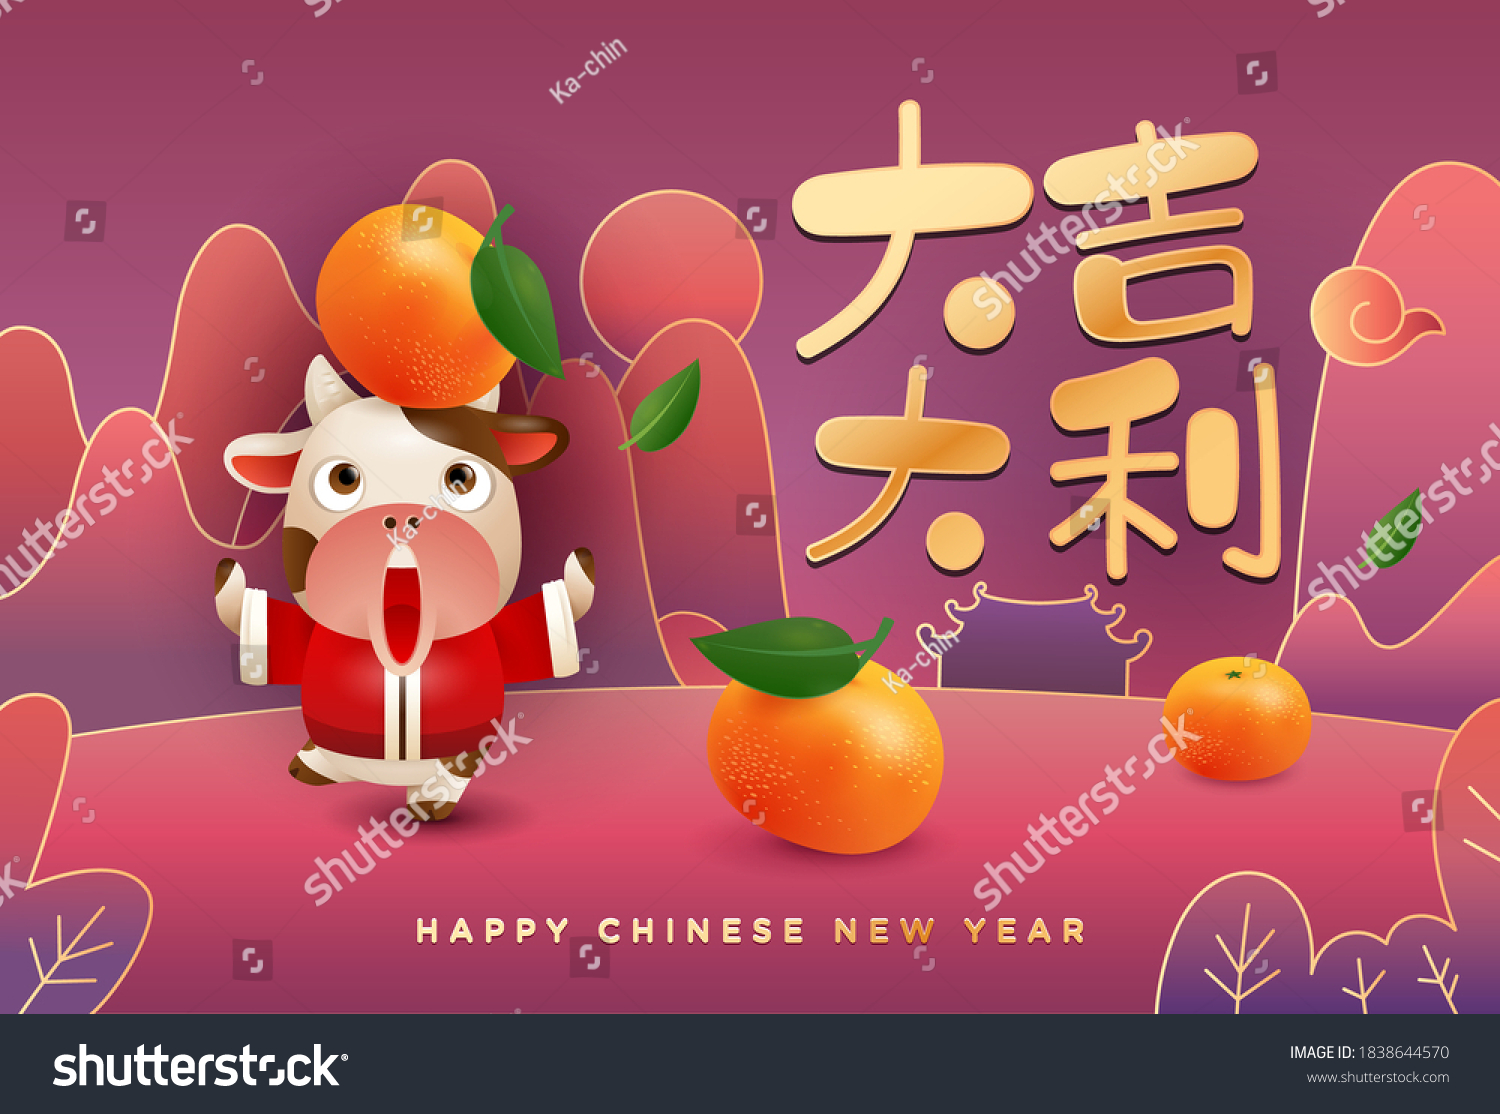 Happy Lunar New Year To You